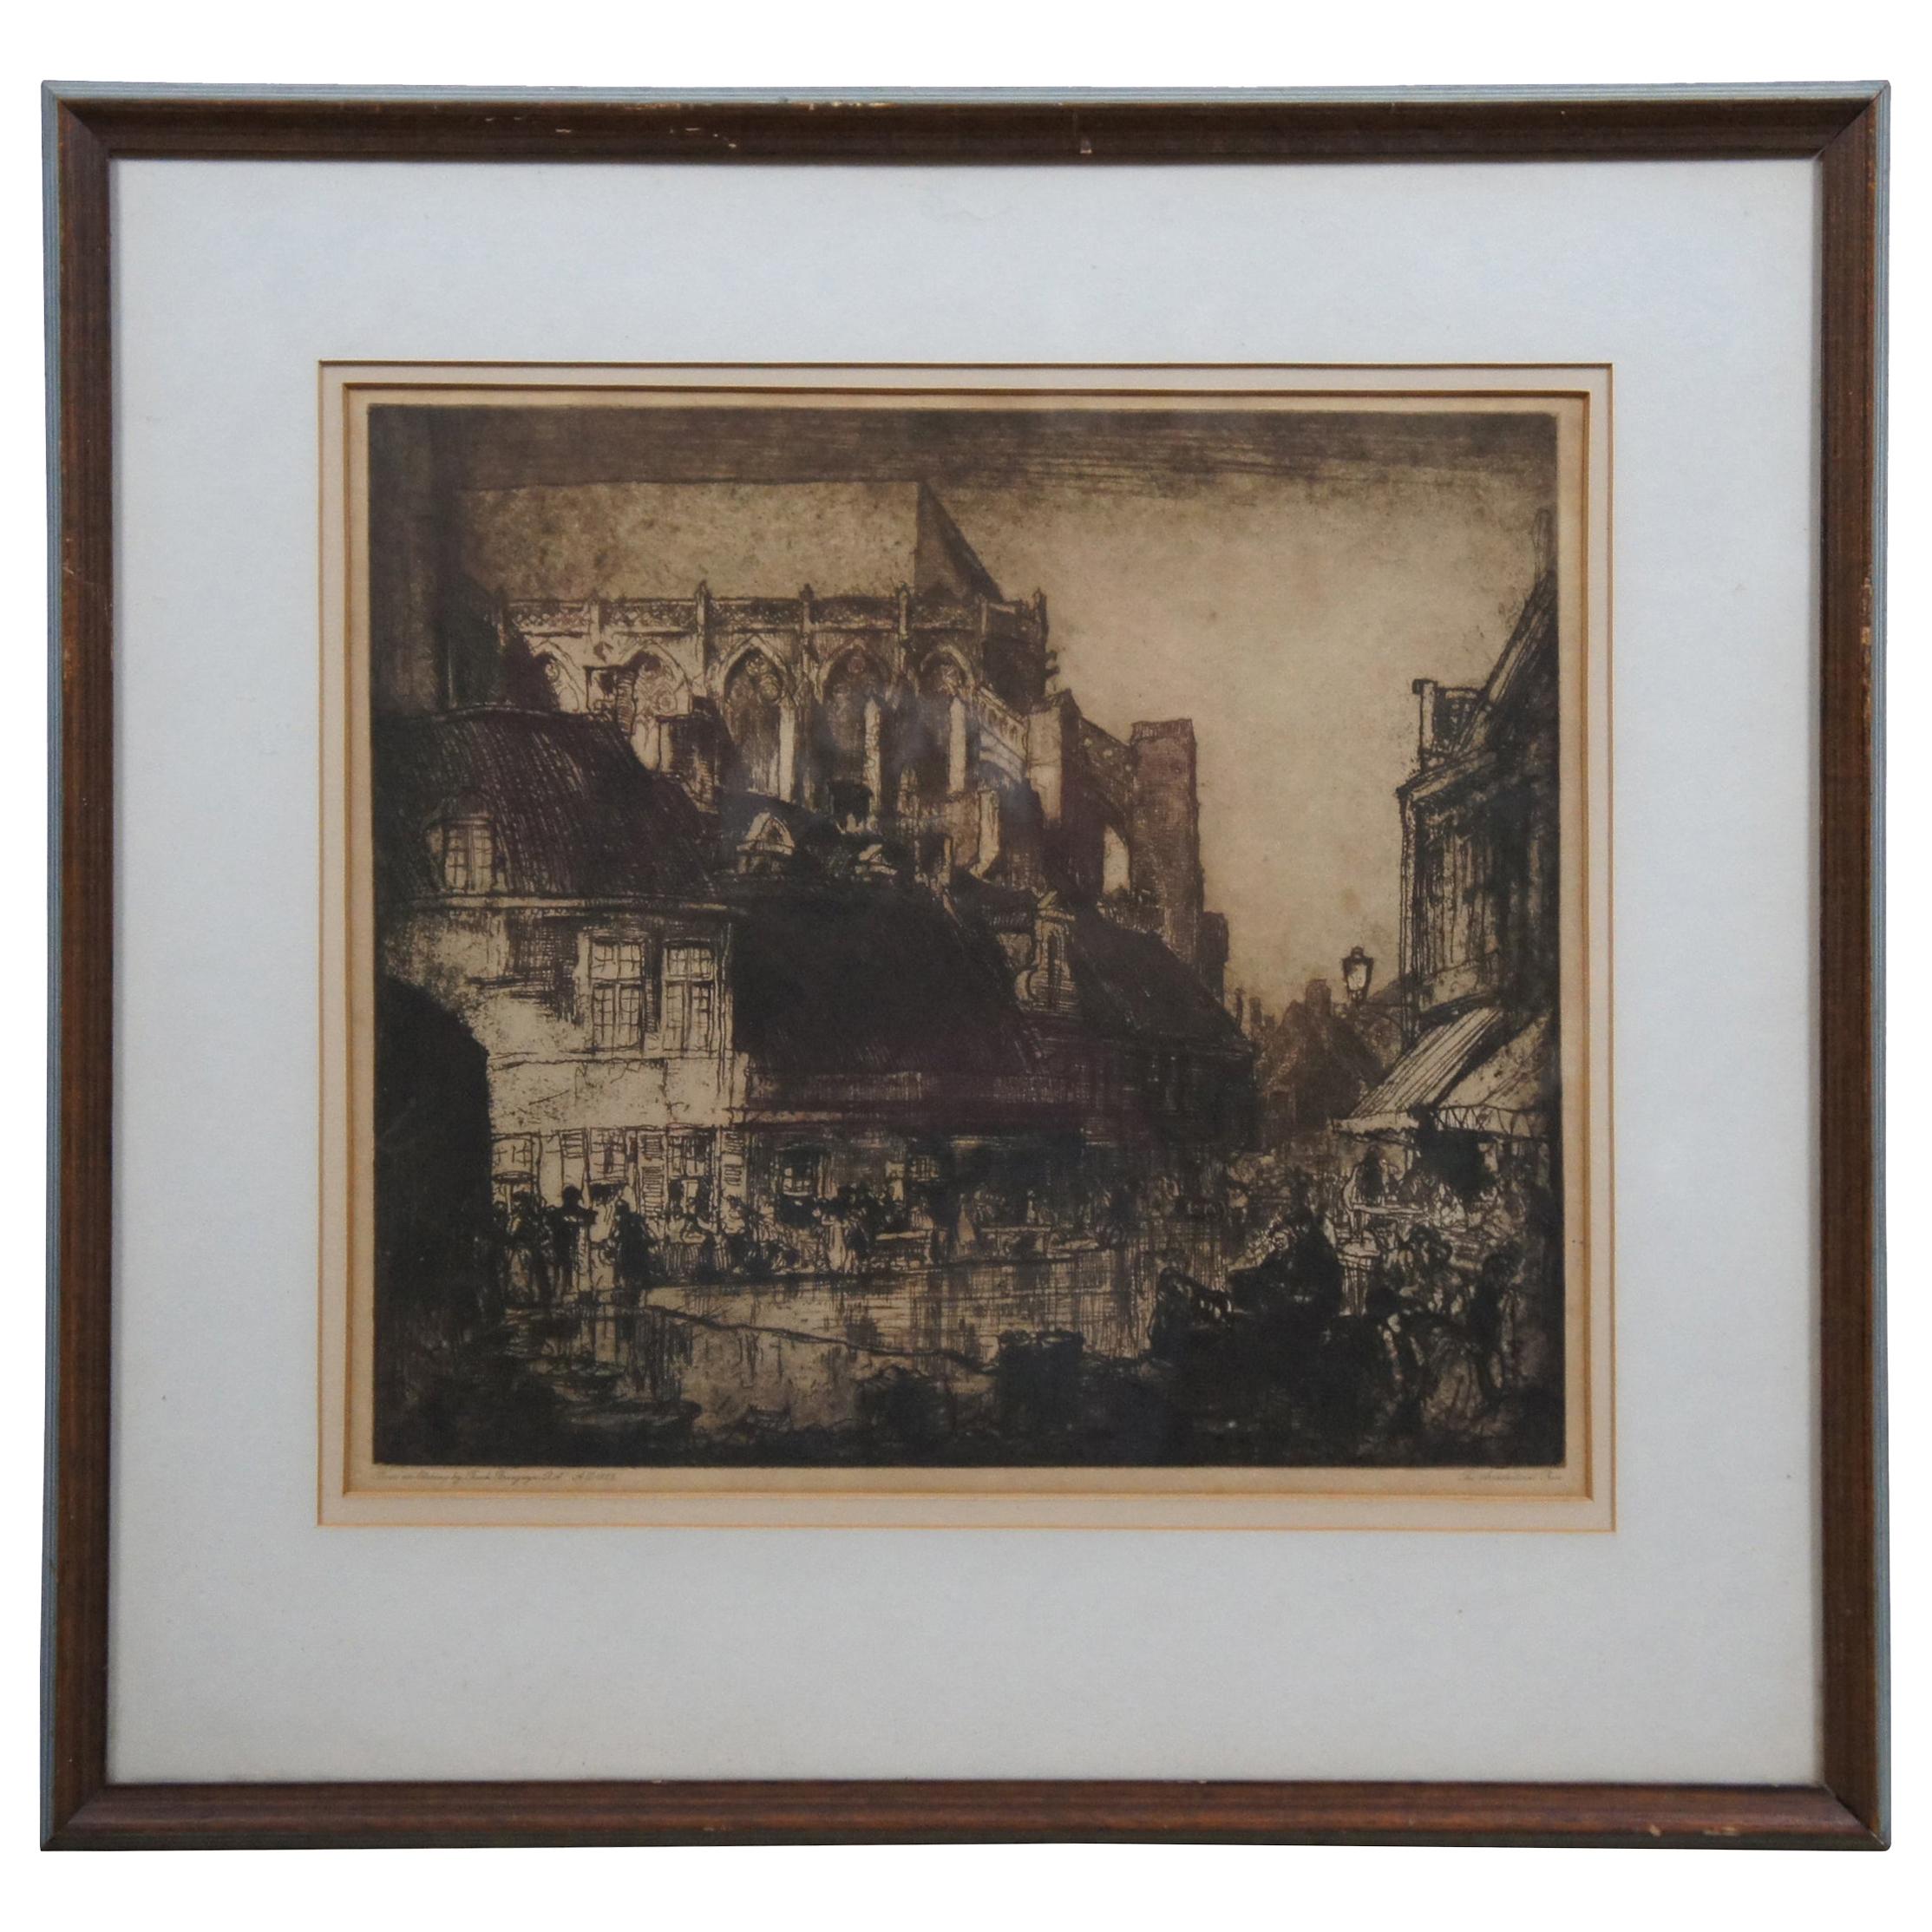 Antique Architectural Press Cathedral Cityscape Etching After Frank Brangwyn